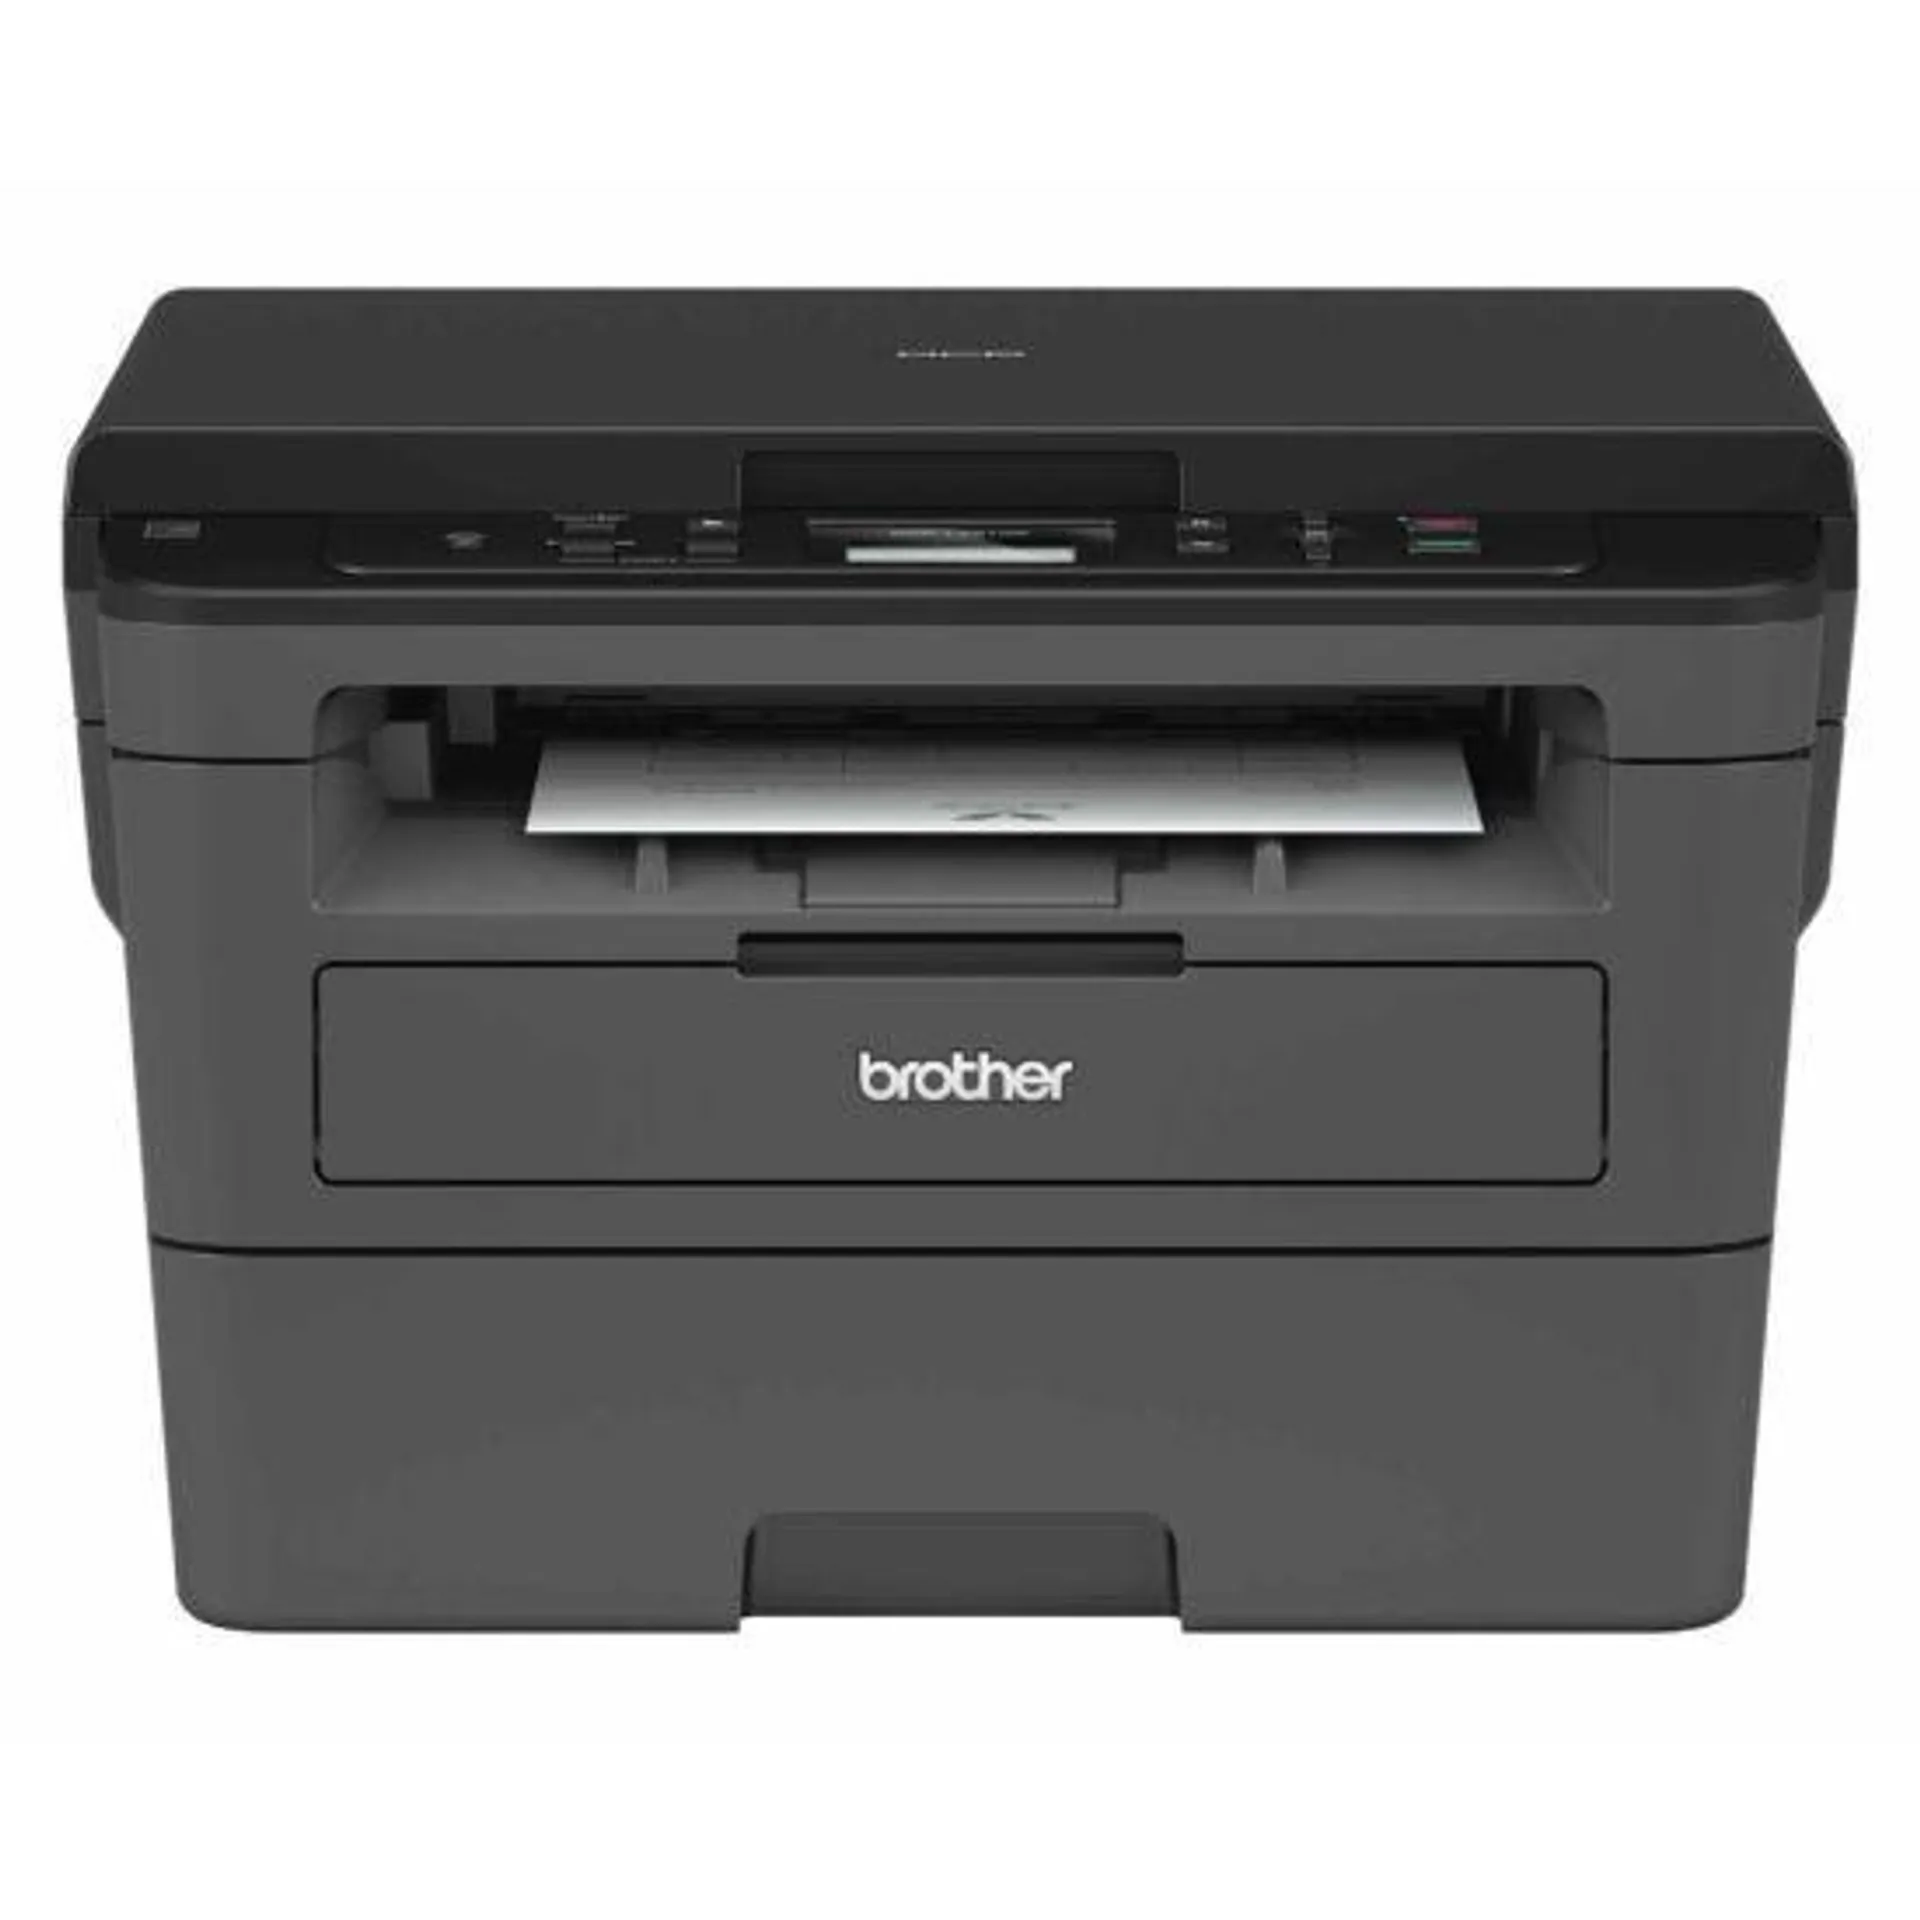 Brother DCP-L2510D All in One Mono Laser Printer